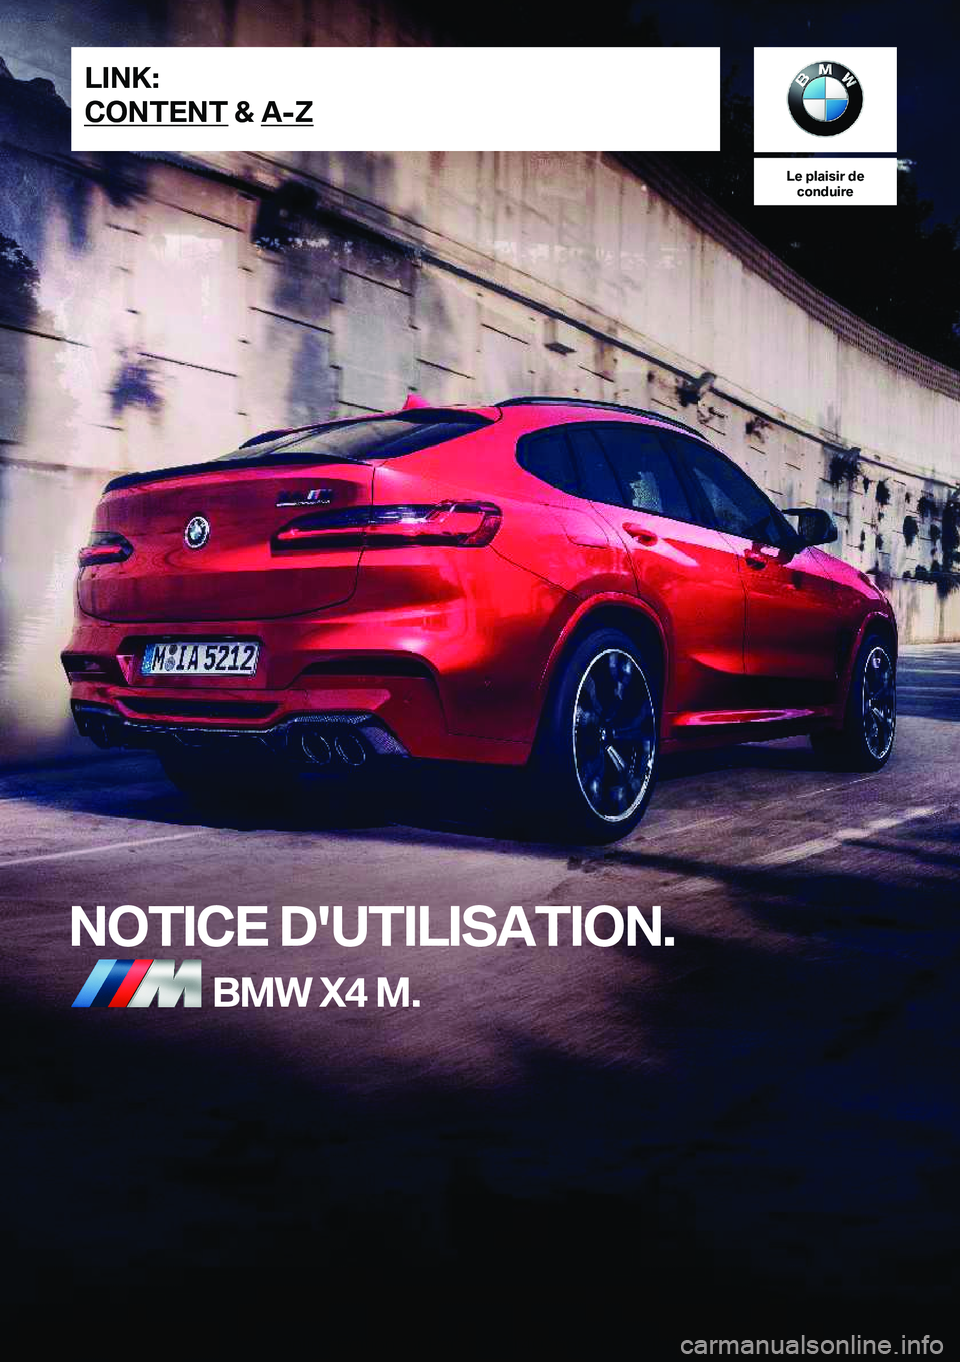 BMW X4 M 2020  Notices Demploi (in French) �L�e��p�l�a�i�s�i�r��d�e�c�o�n�d�u�i�r�e
�N�O�T�I�C�E��D�'�U�T�I�L�I�S�A�T�I�O�N�.�B�M�W��X�4��M�.�L�I�N�K�:
�C�O�N�T�E�N�T��&��A�-�Z�O�n�l�i�n�e��E�d�i�t�i�o�n��f�o�r��P�a�r�t��n�o�.�